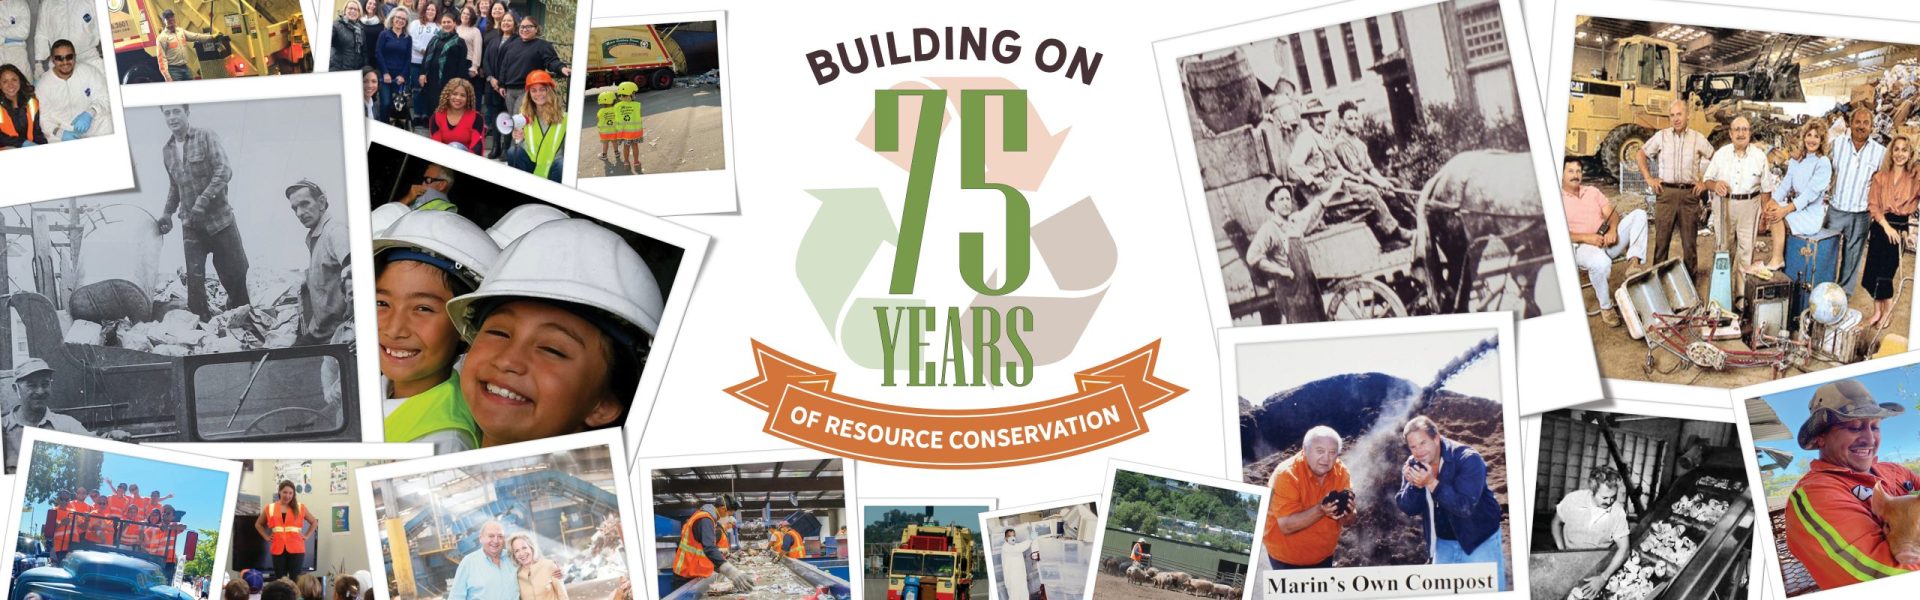 Image: 75th Anniversary with collage of historical photos